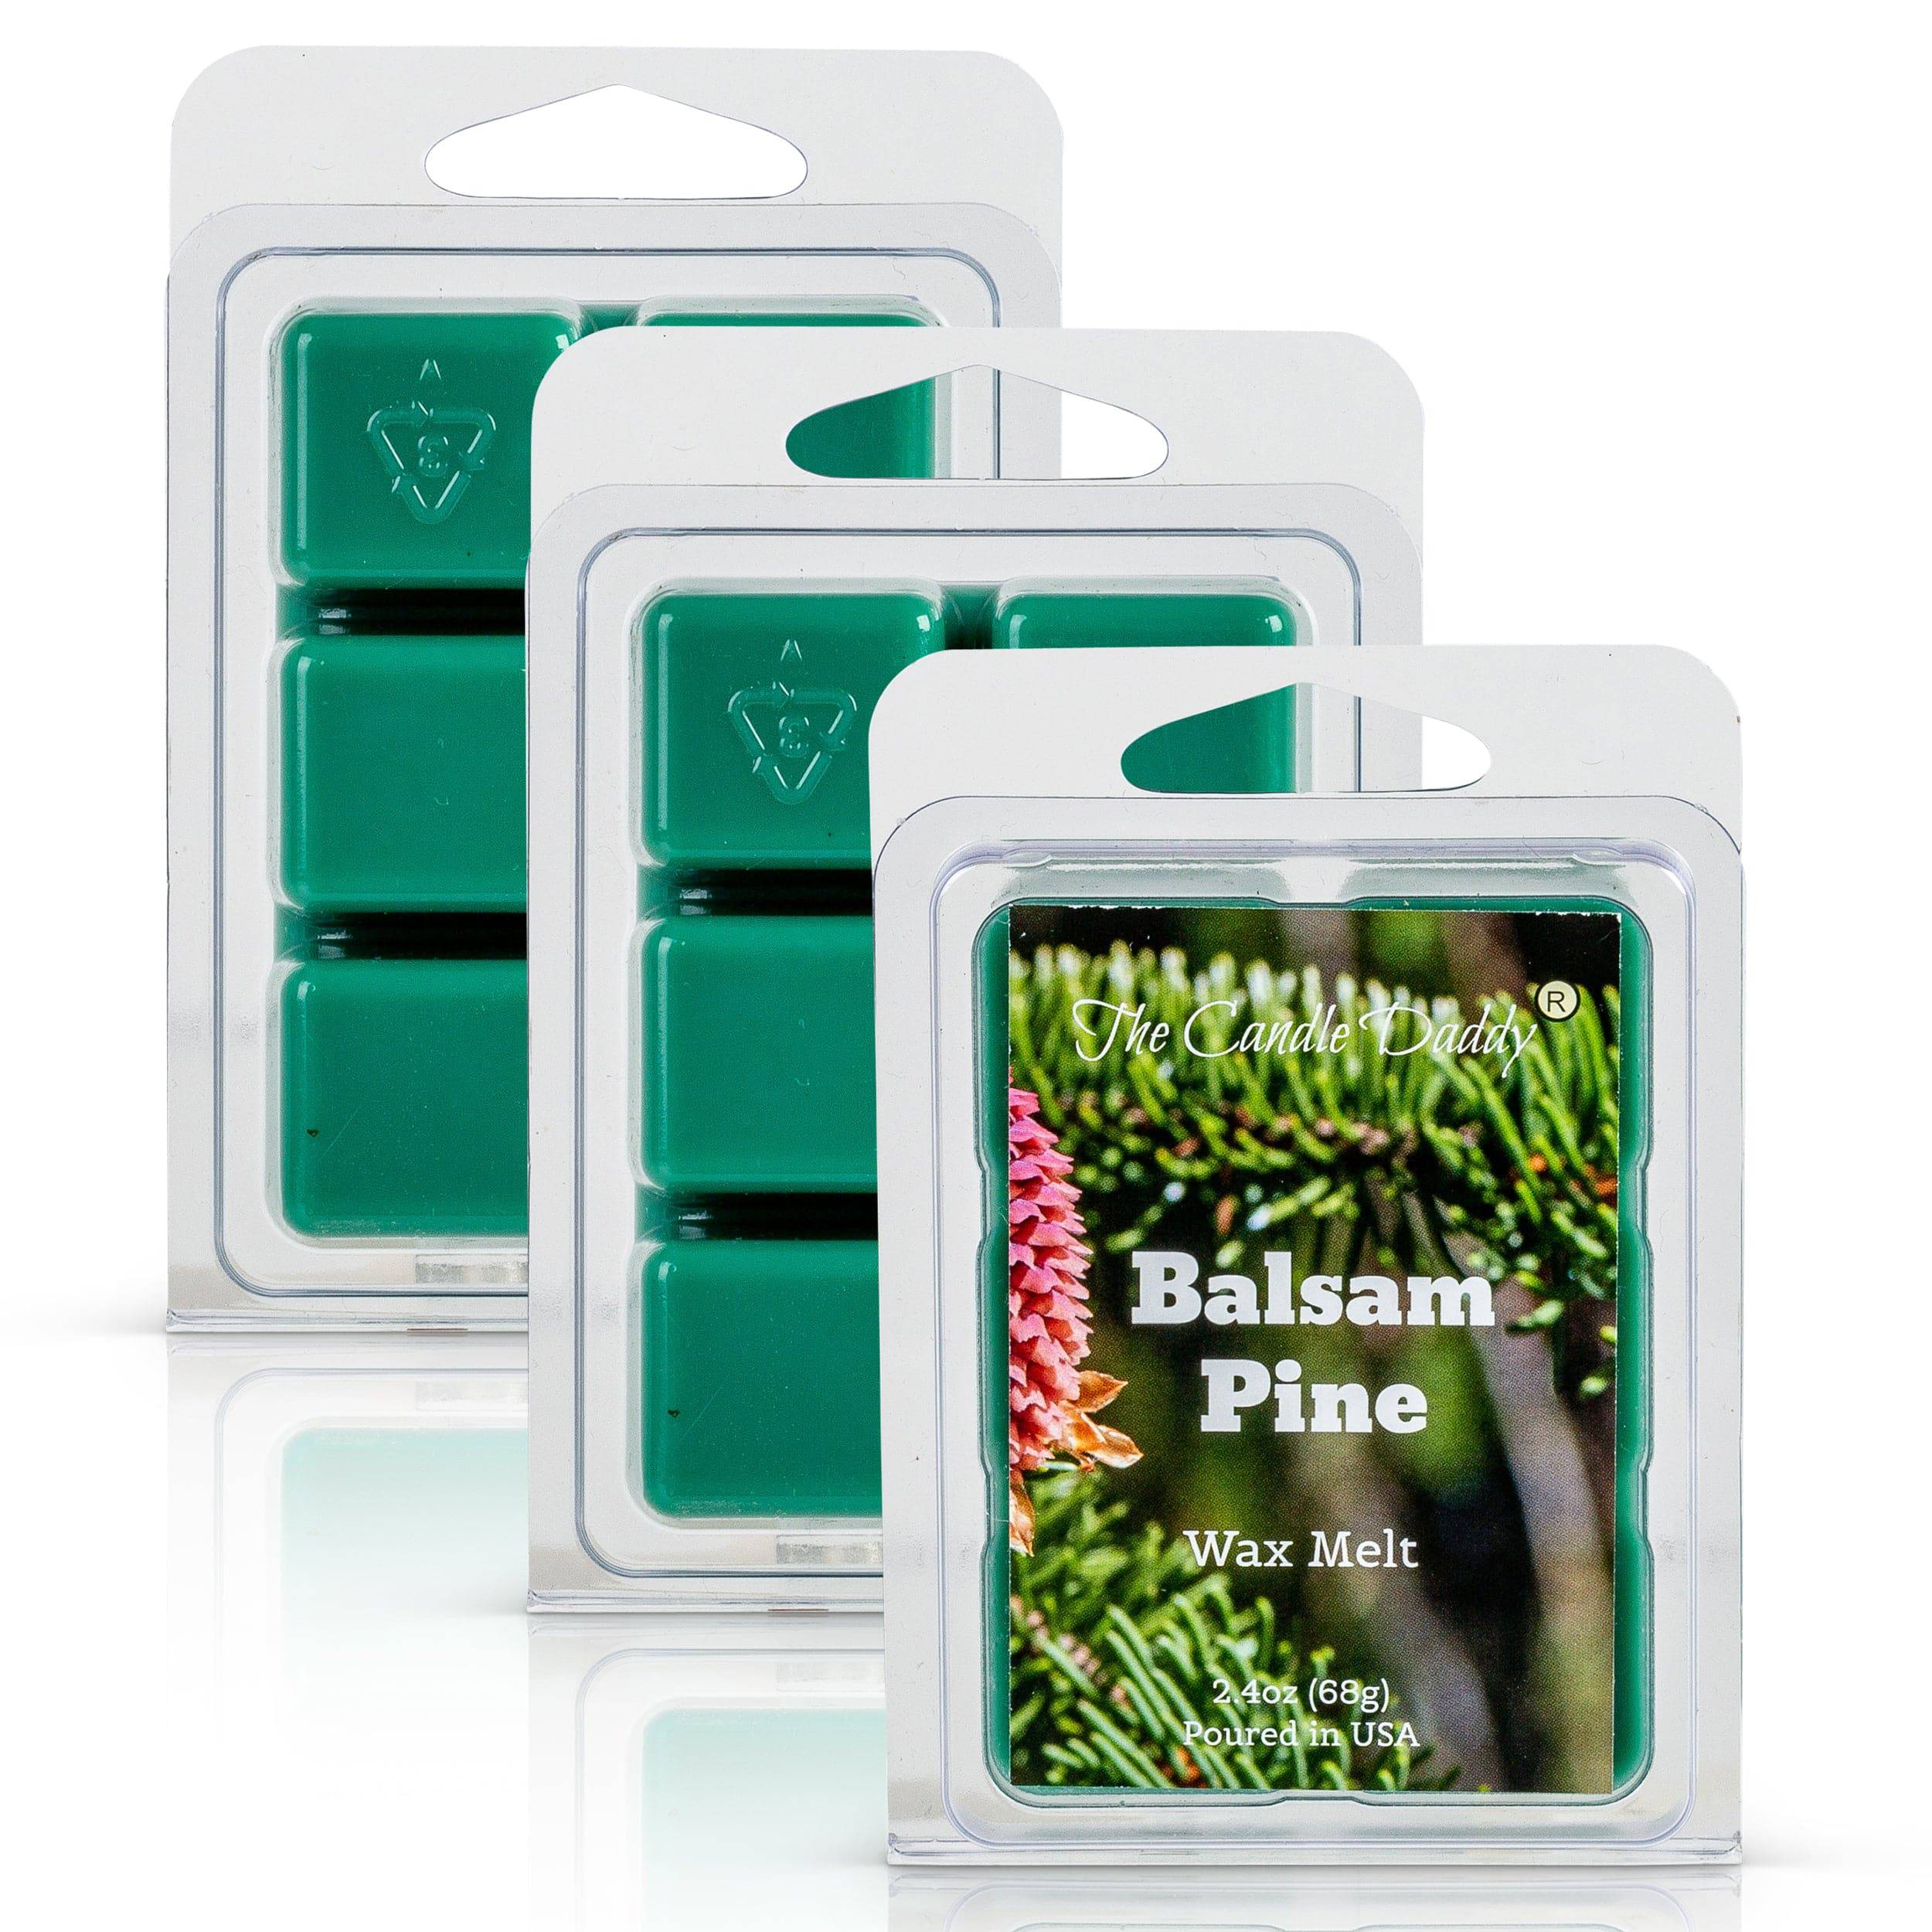 Pine Highly Scented Wax Melts Variety Pack - Bayberry Fir, Christmas Tree, Mistletoe Moments, Green